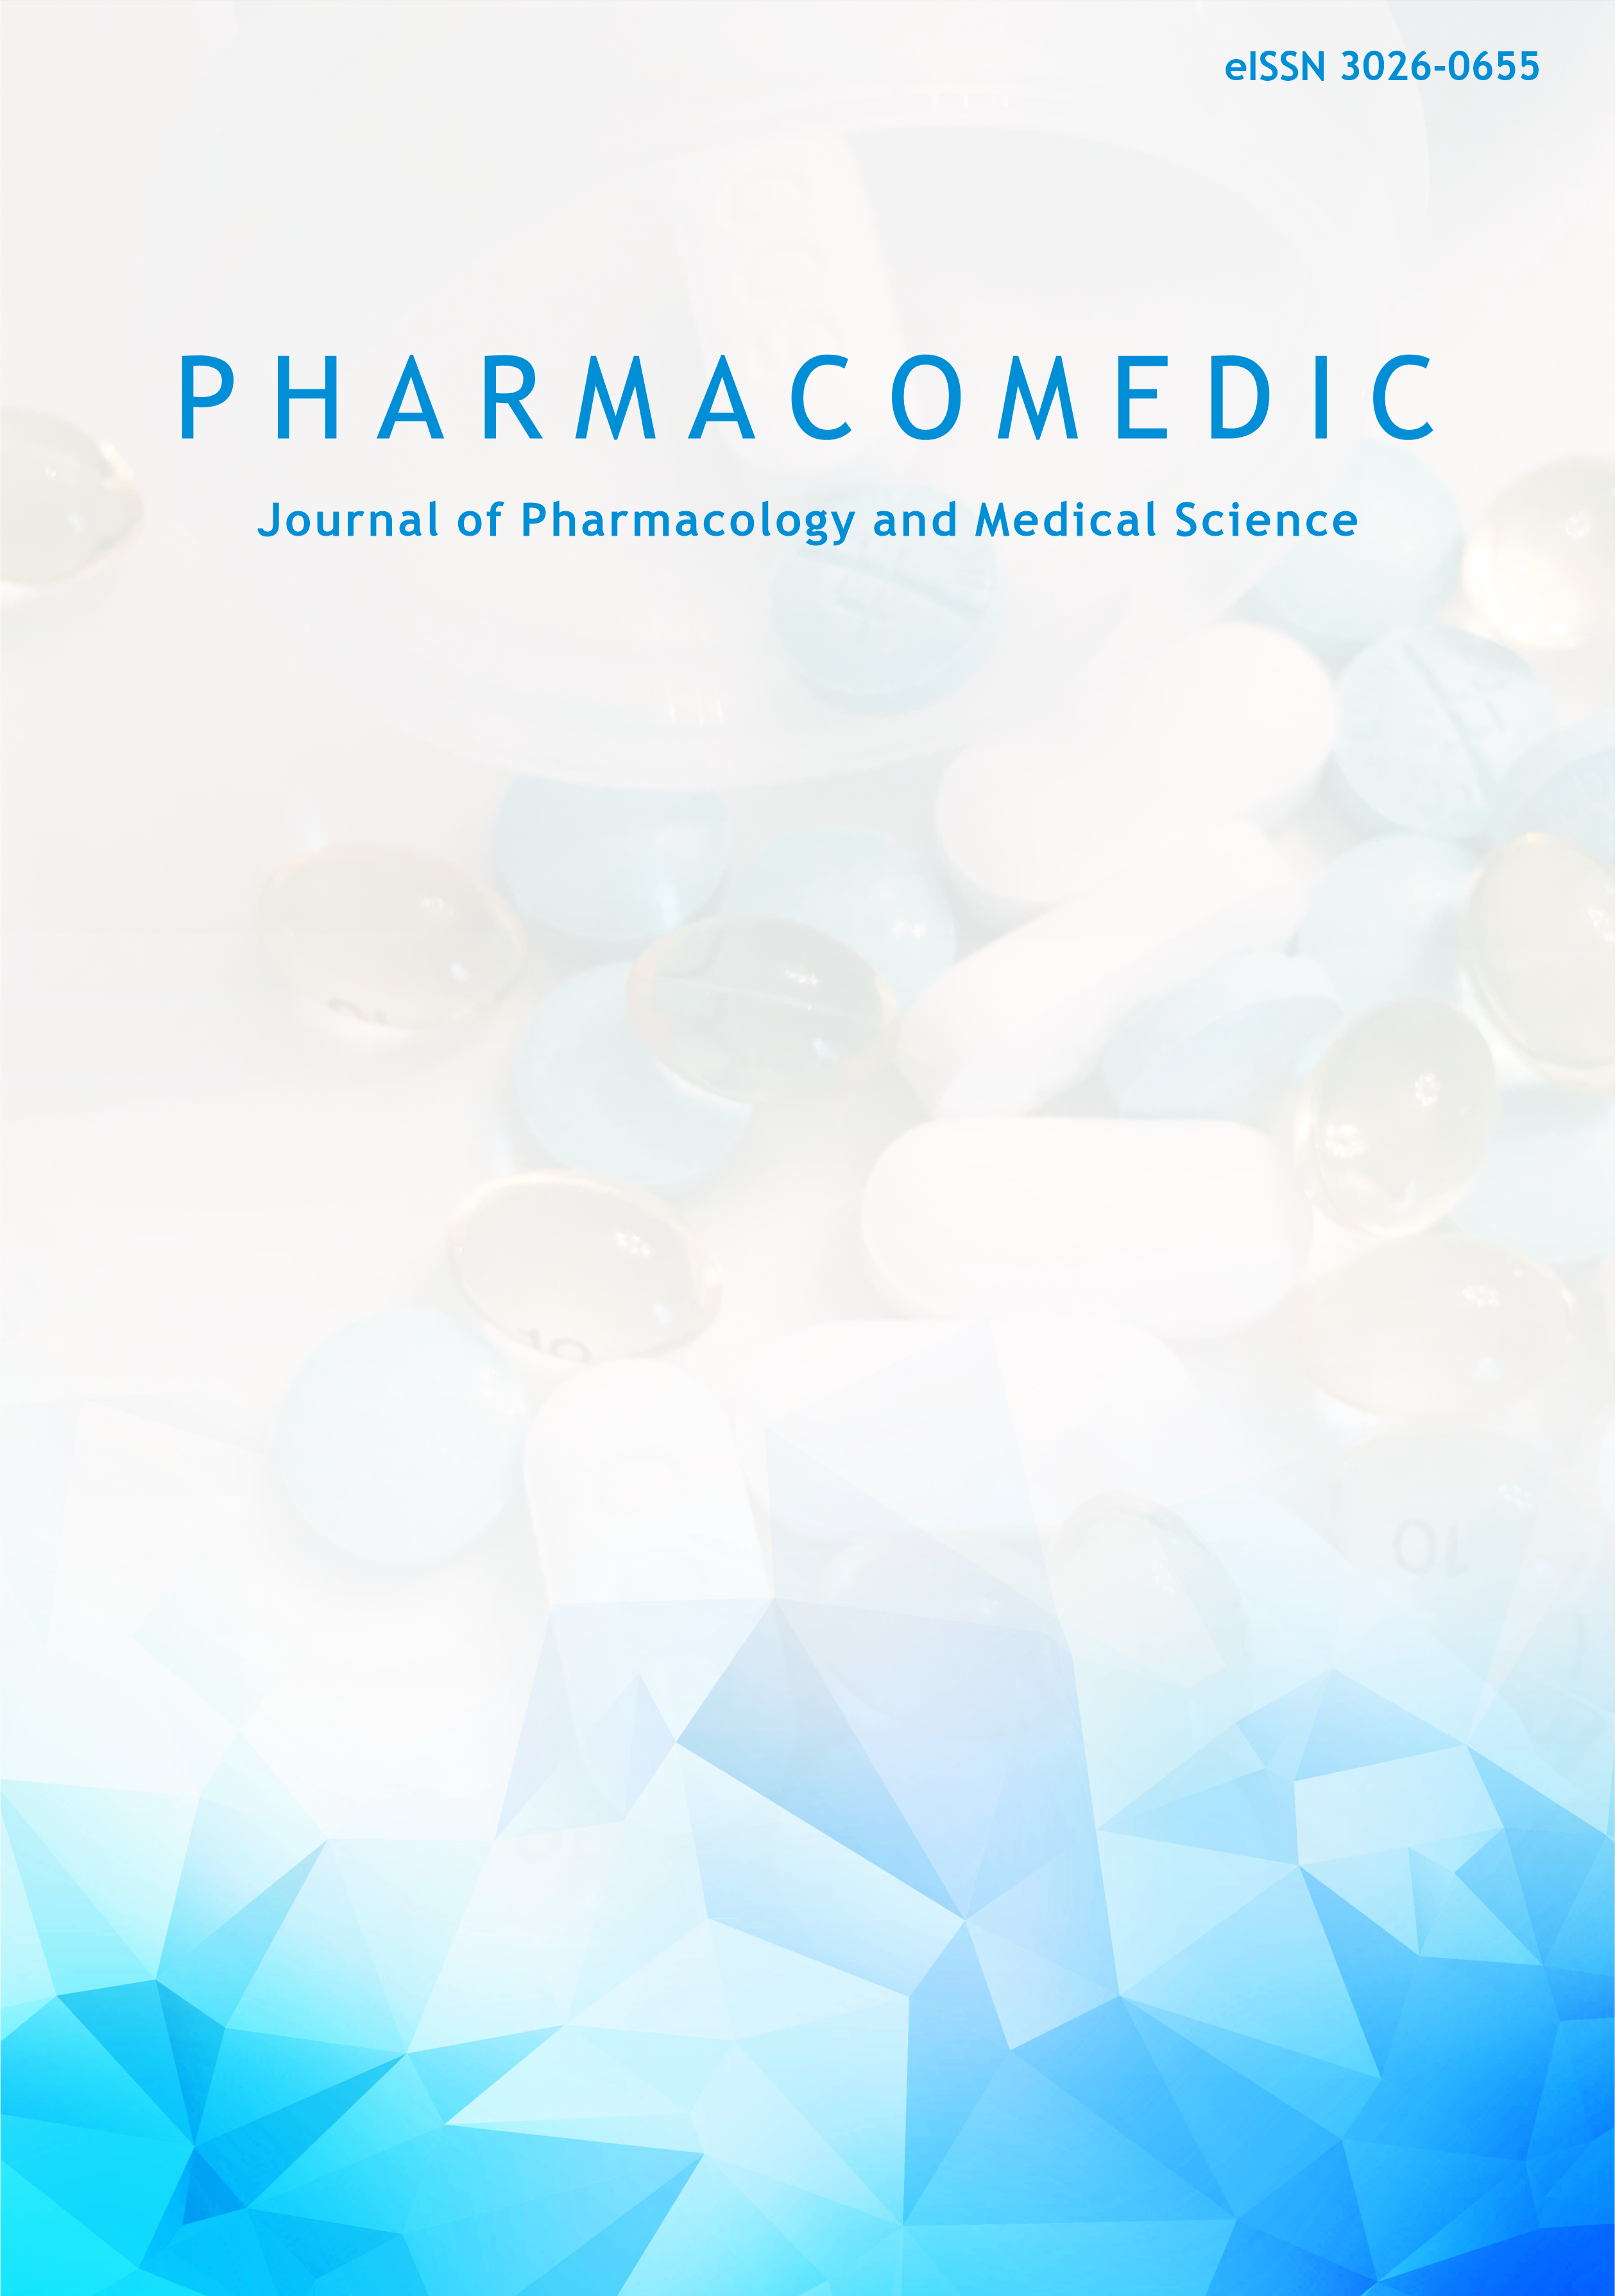 PharmacoMedic: Journal of Pharmacology and Medical Science